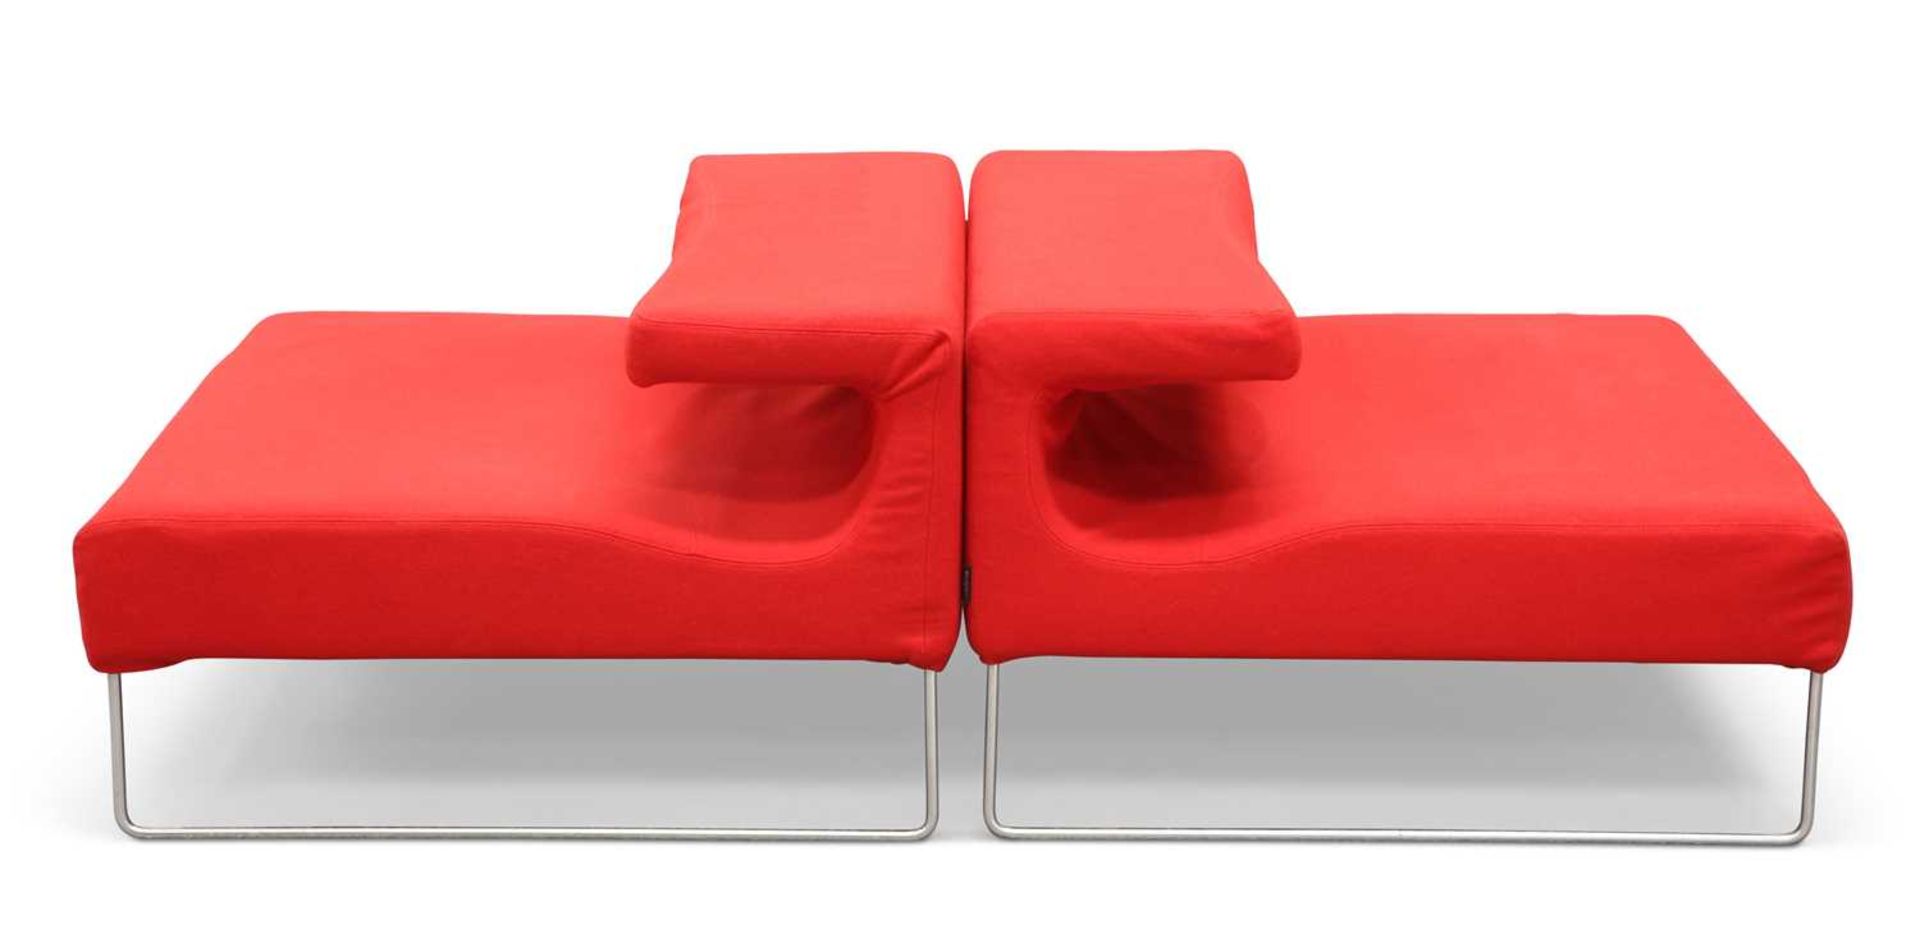 A PAIR OF MOROSO RED UPHOLSTERED LOW SEATS - Image 2 of 2